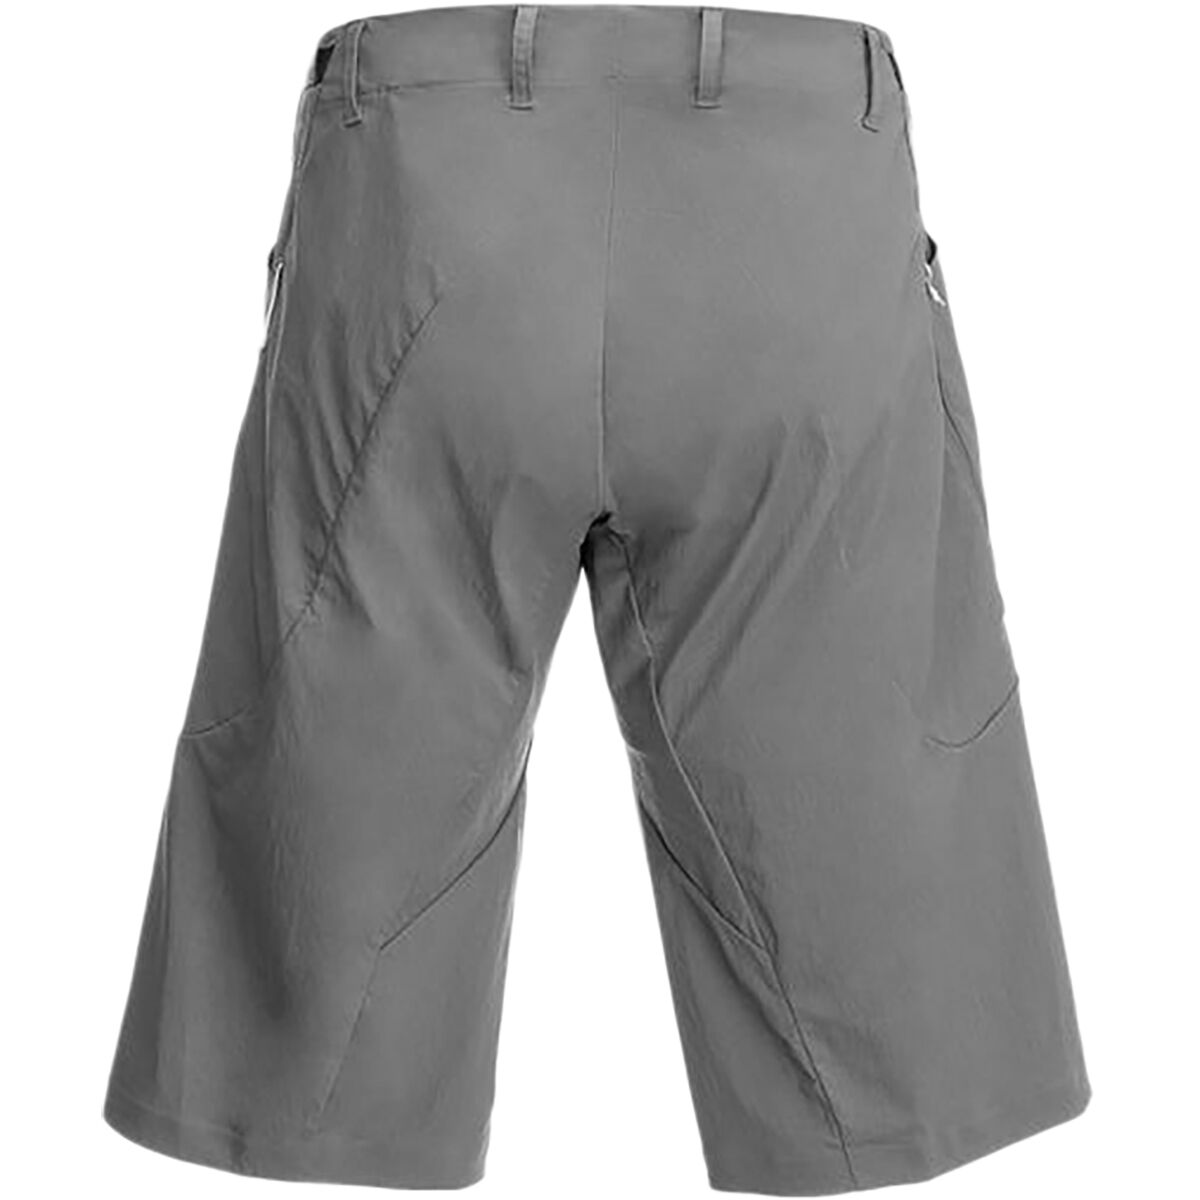 7mesh Industries Glidepath Short - Men's | Competitive Cyclist